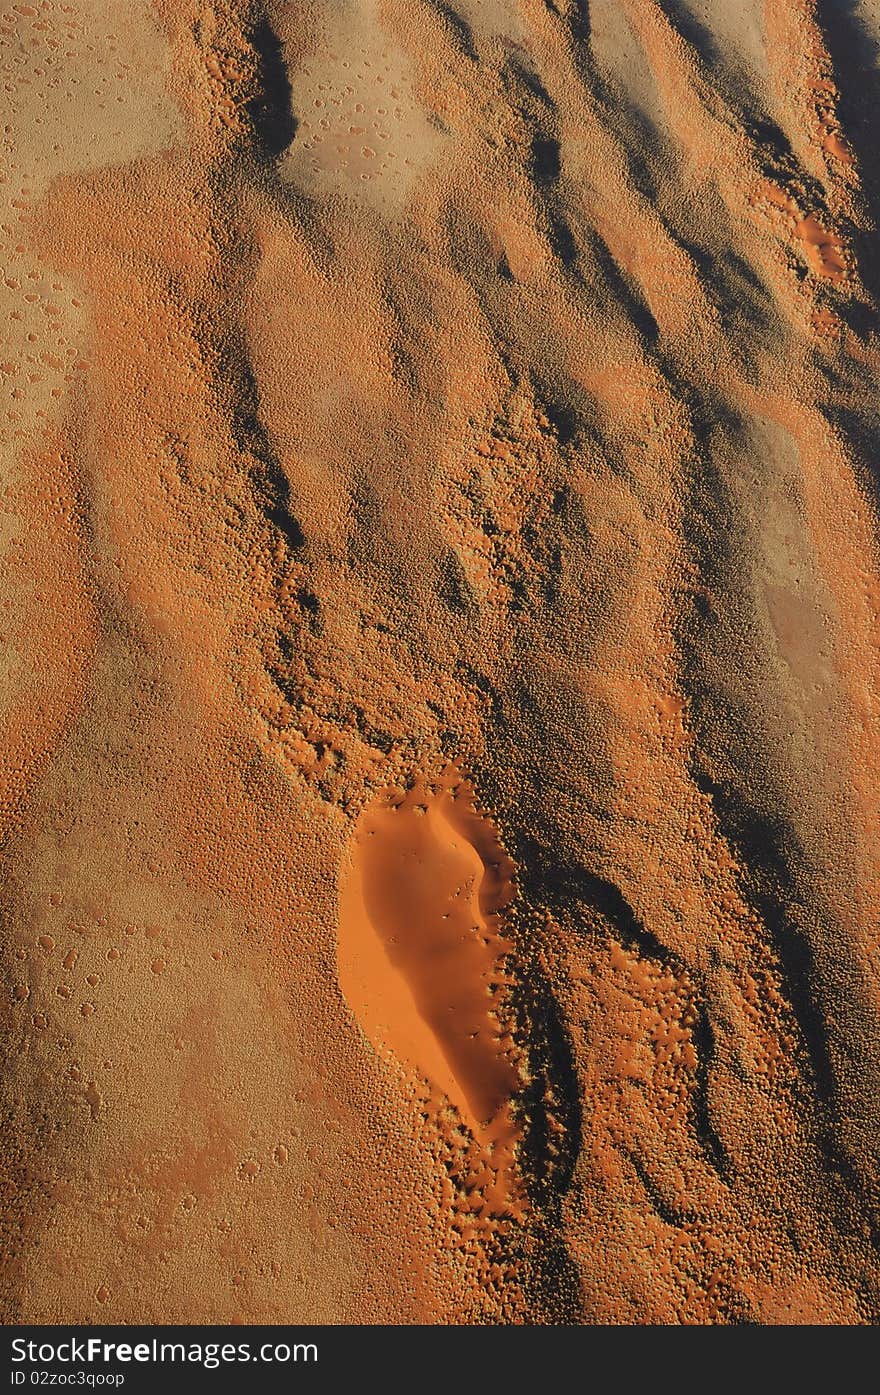 Abstract view straight down on the Namib Desert from a hot air balloon (Namibia). Abstract view straight down on the Namib Desert from a hot air balloon (Namibia).